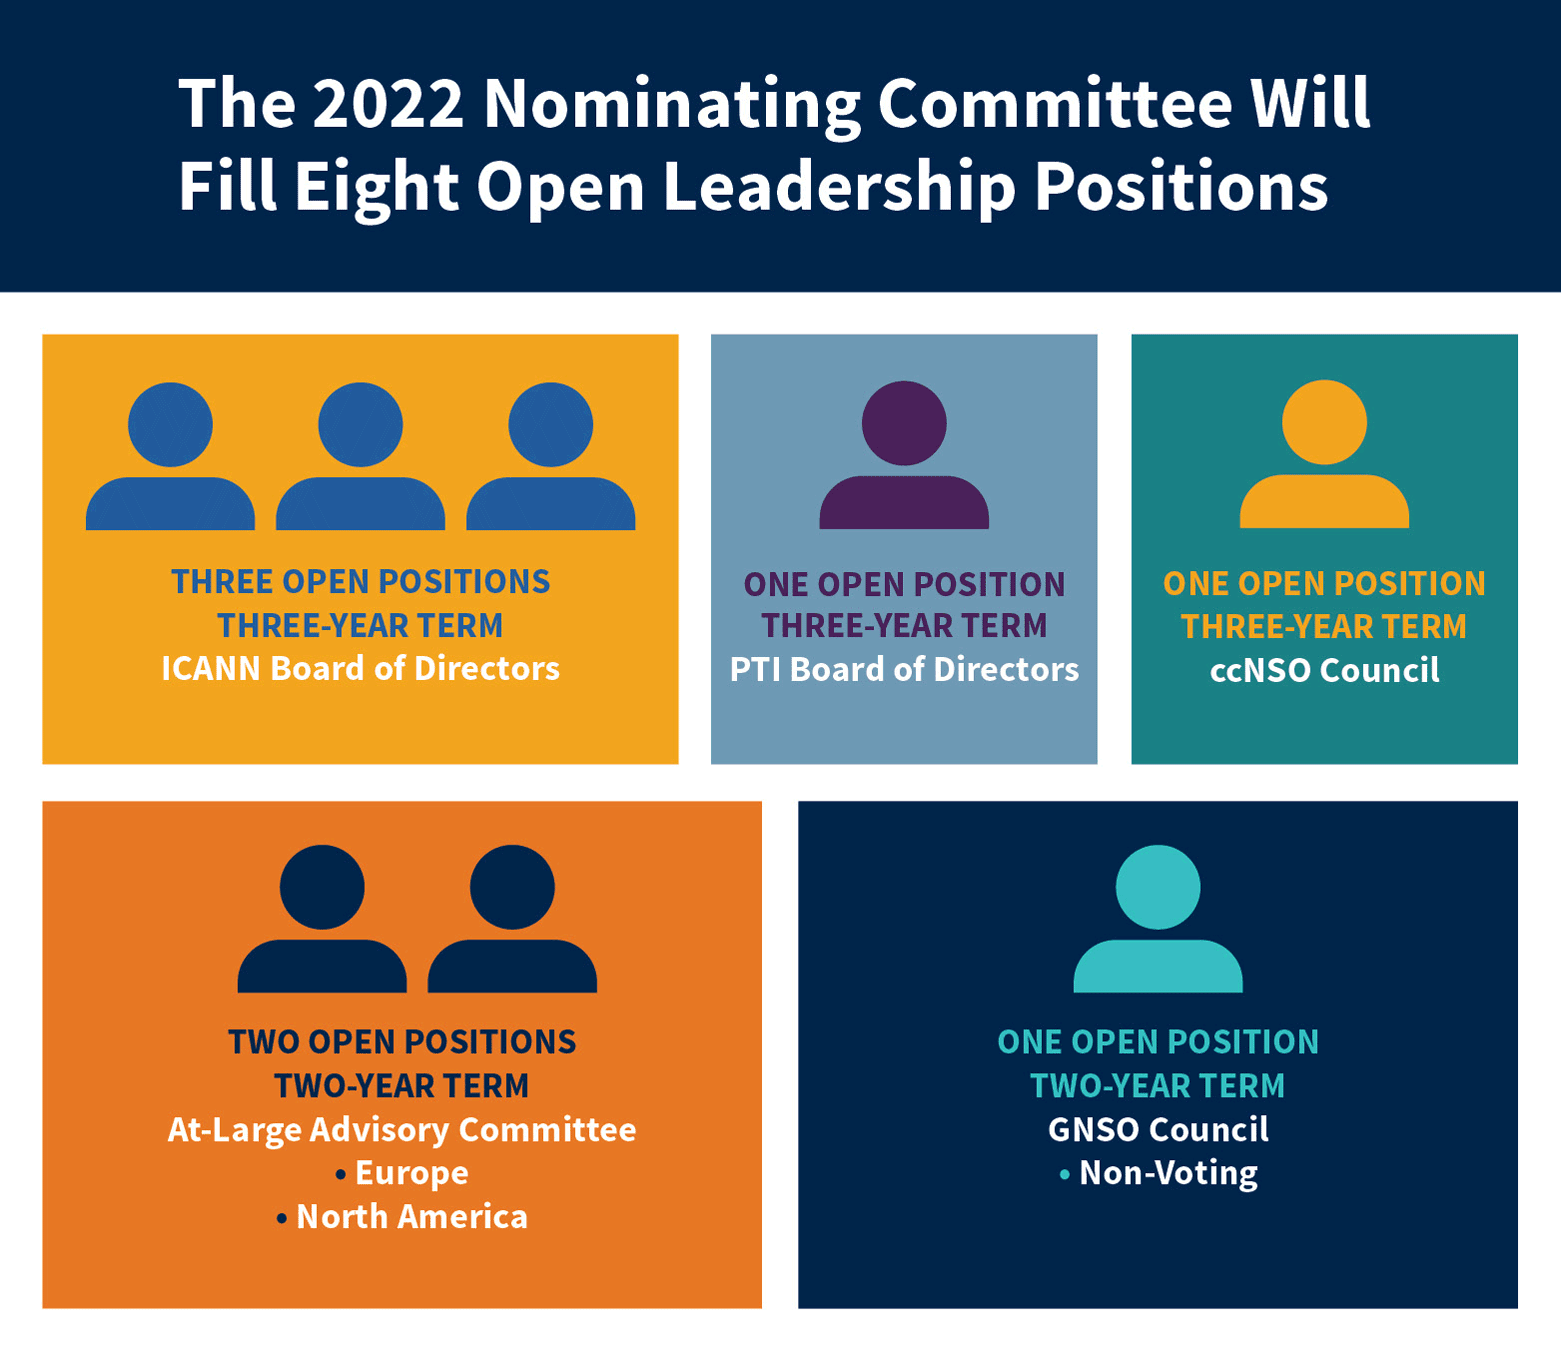 The 2022 Nominating Committee Will Fill Eight Open Leadership Positions: Three open positions, Three-year term, ICANN Board of Directors. One open position, Three-year term, PTI Board of Directors. One open position, Three-year term, ccNSO Council. Two open positions, Two-year term. At-Large Advisory Committee, Europe, North America. One open position, Two-year term, GNSO Council, Non-Voting.